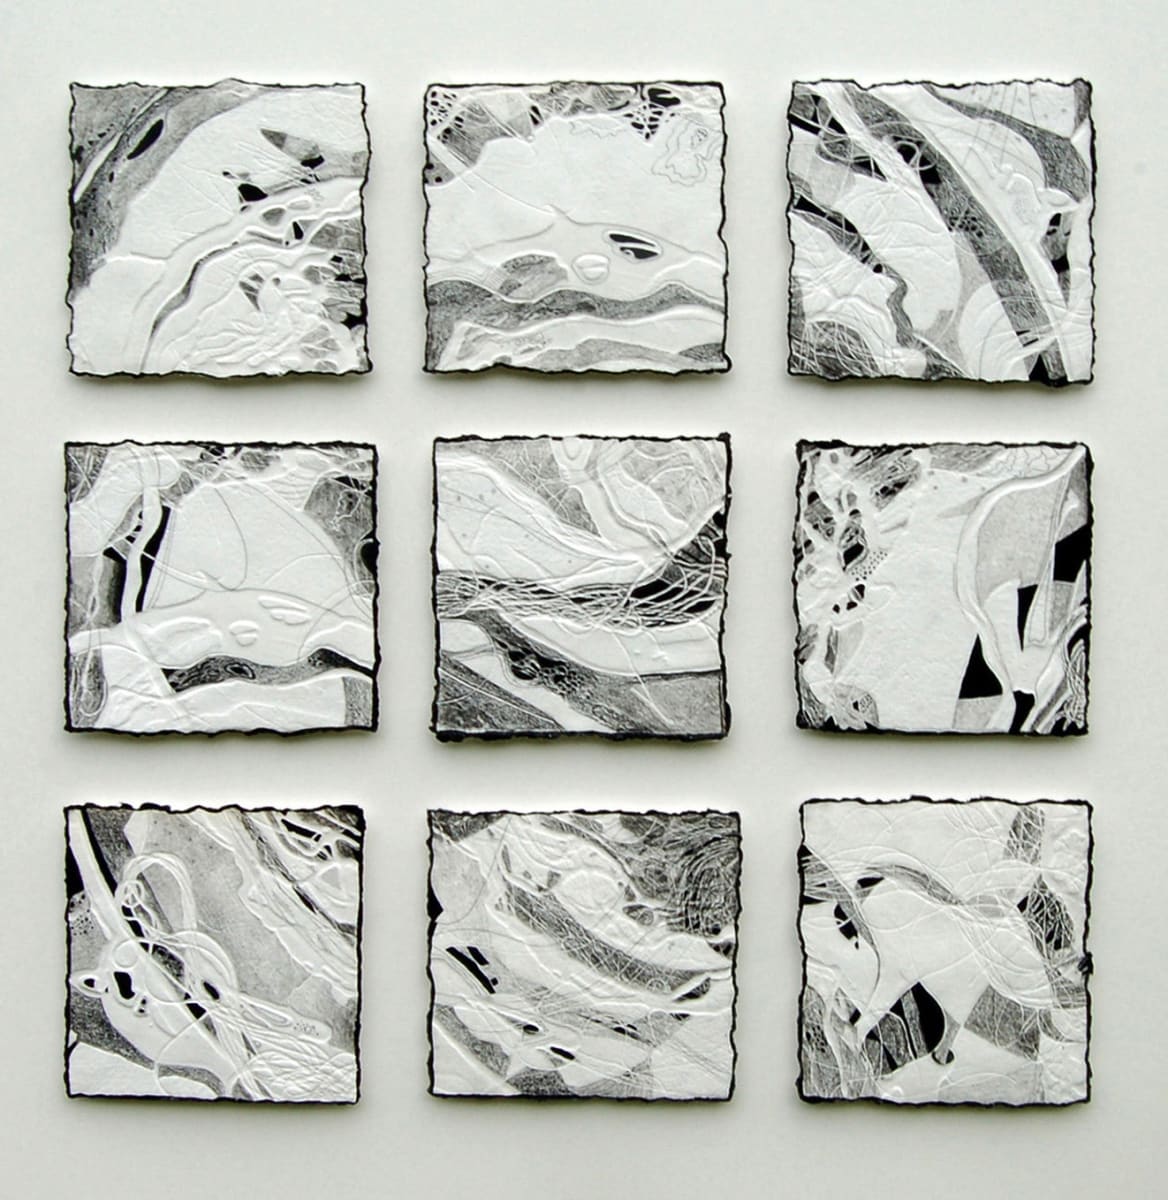 Black on White II by Brenda Hartill  Image: Collaged embossed Drawing